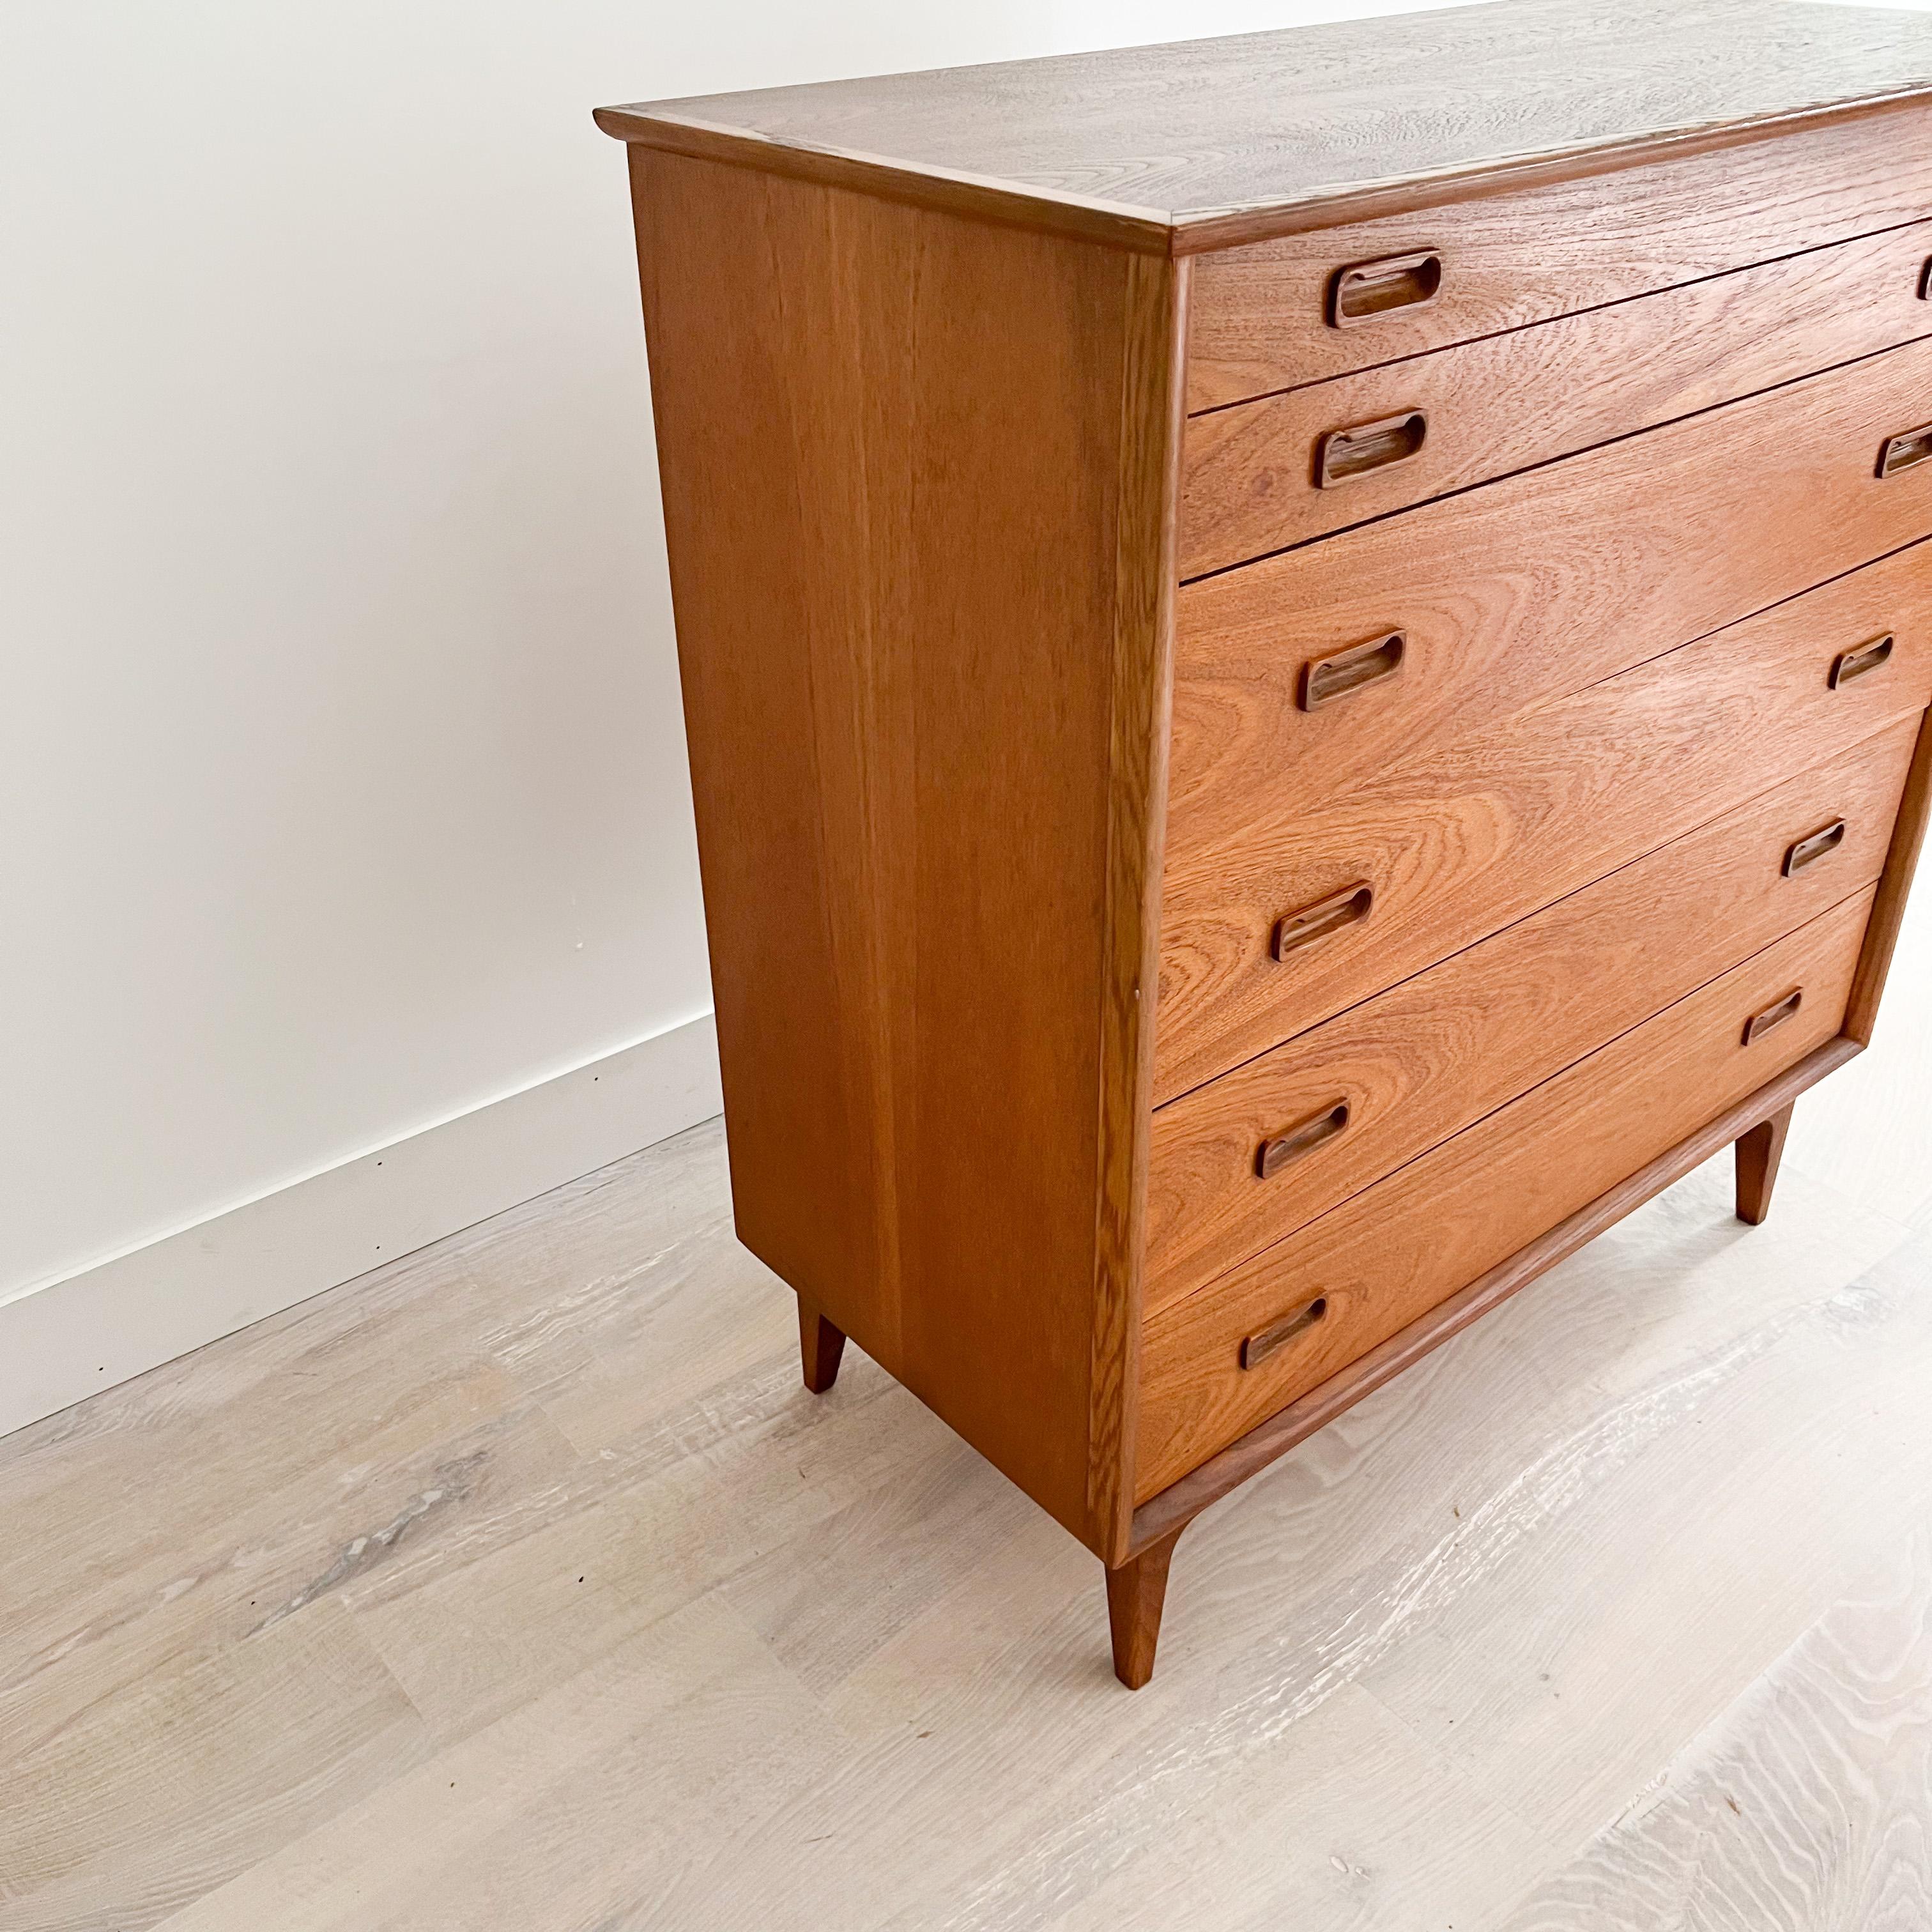 Mid century modern danish teak 5 drawer highboy dresser with oak trim. The top has been sanded and restored. Some light scuffing/scratching from age appropriate wear.